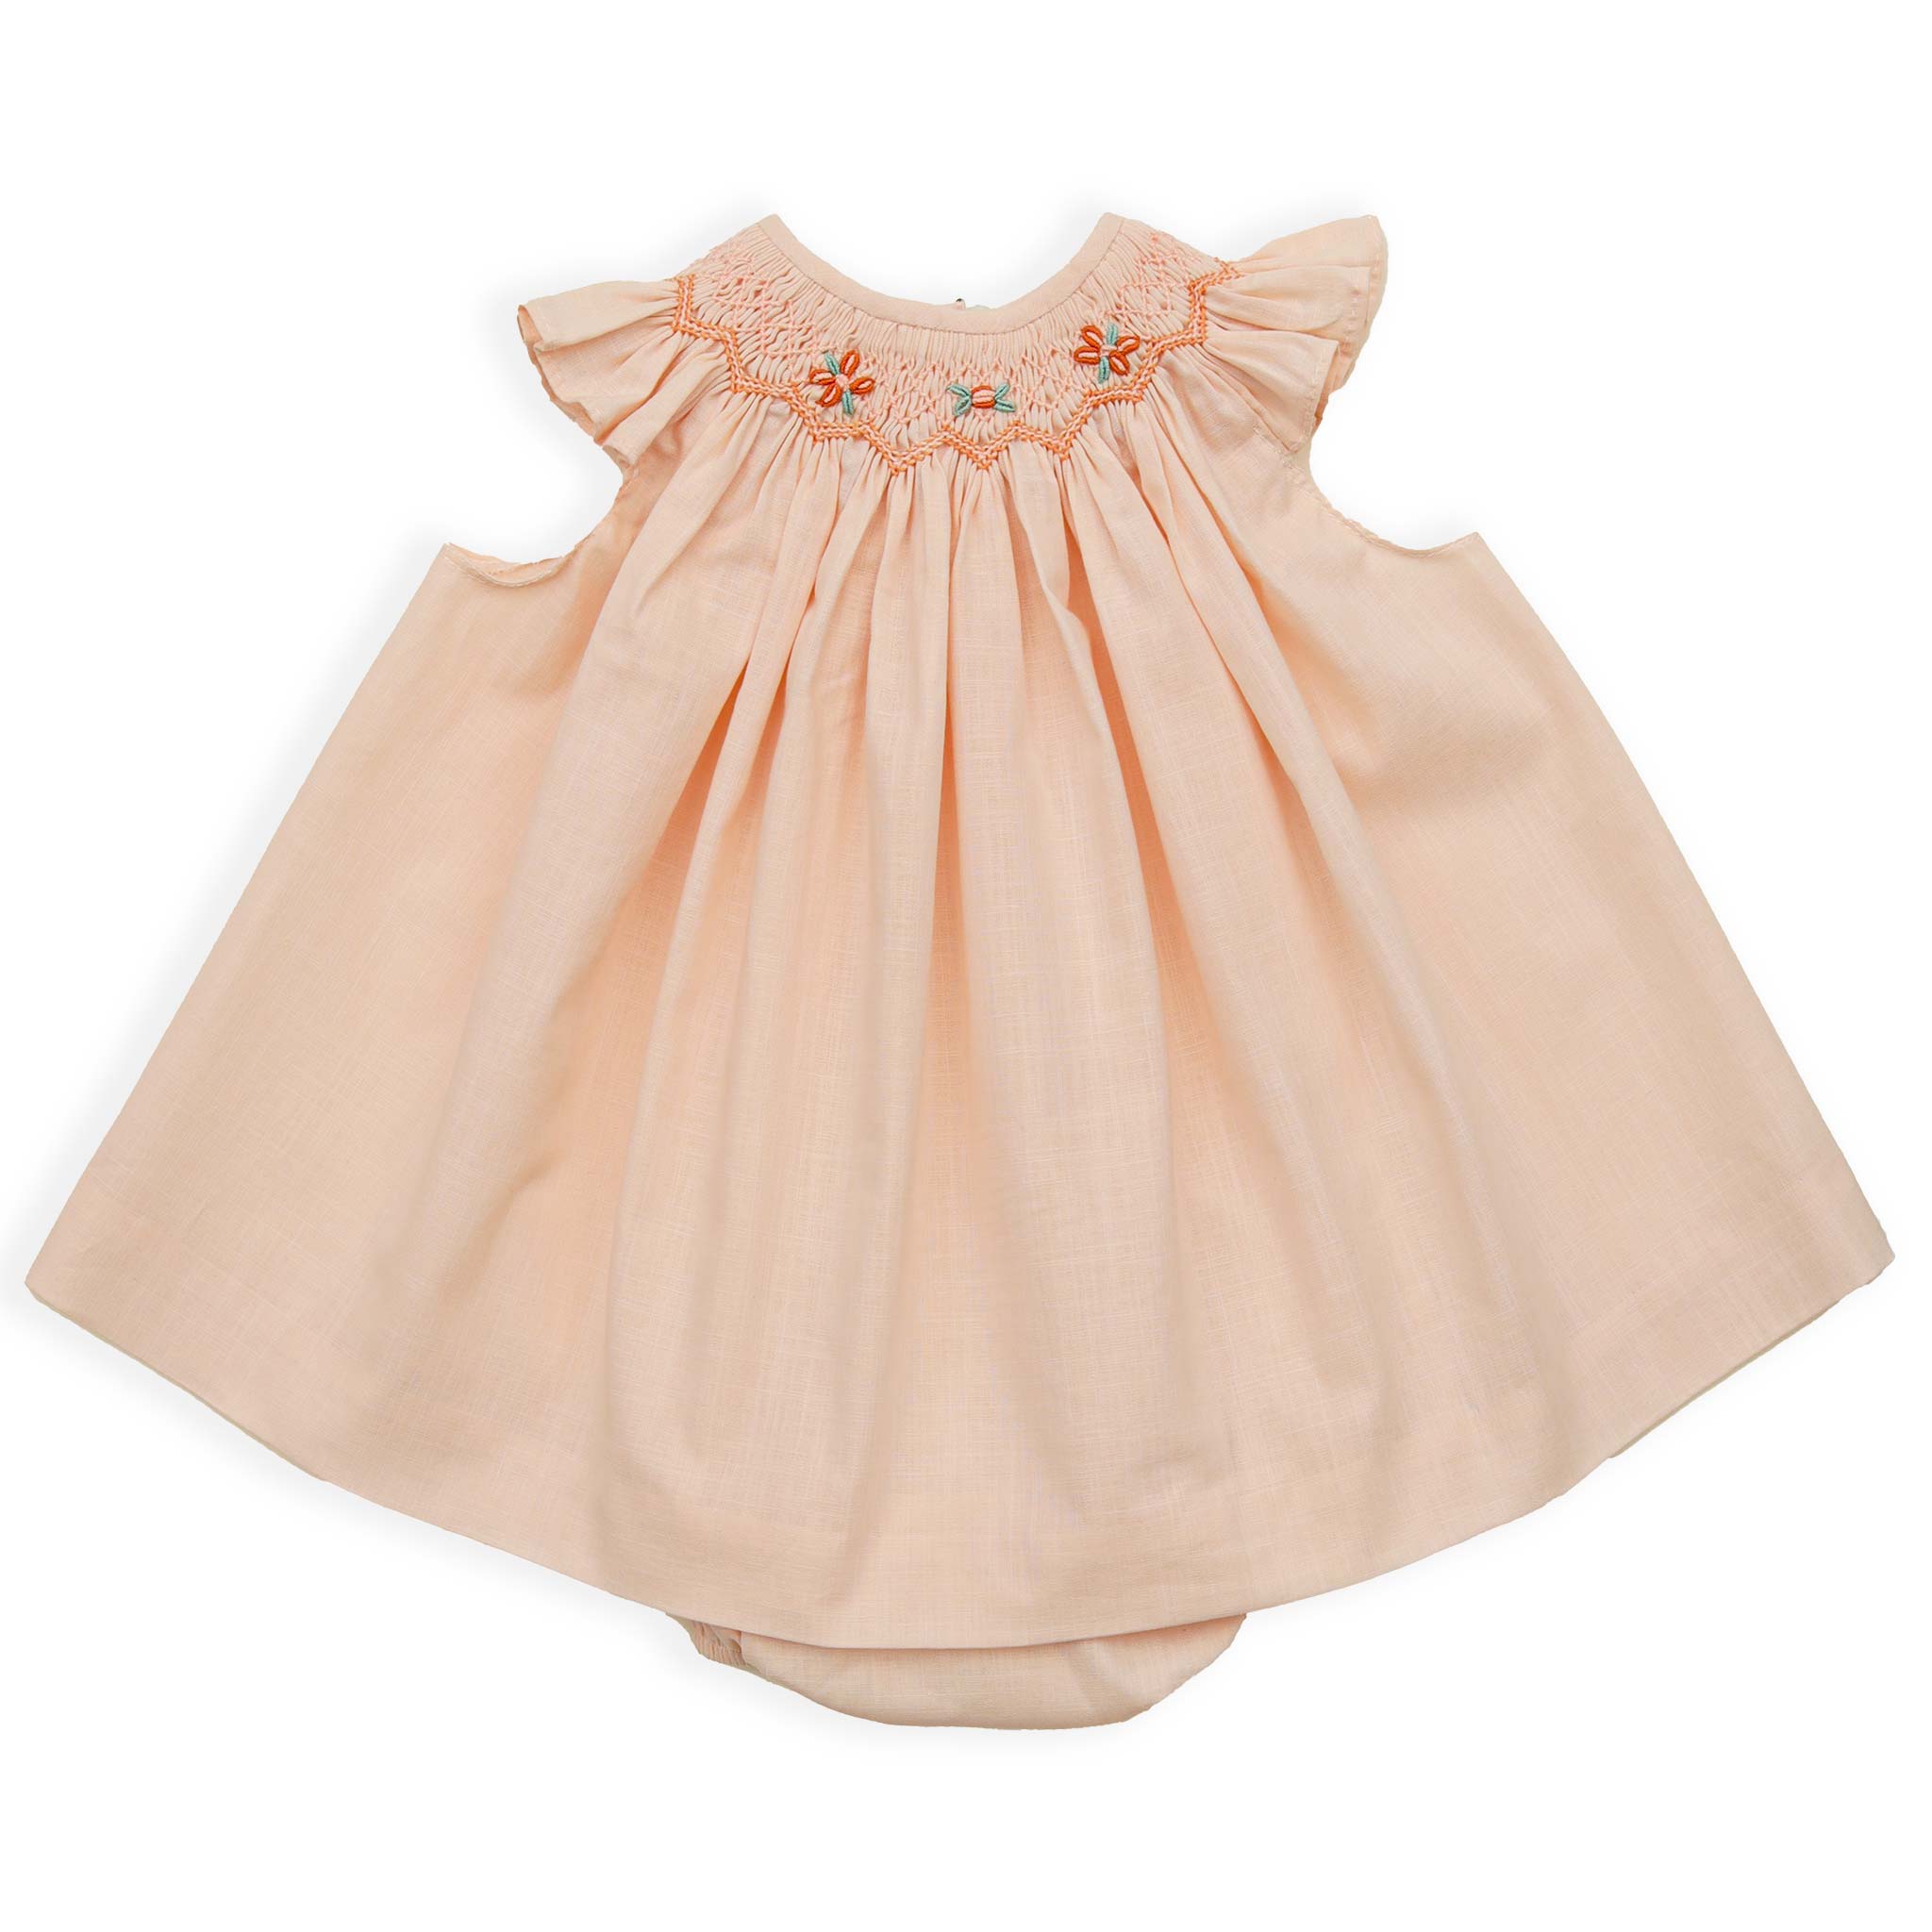 peach spanish smockeed baby girl outfit